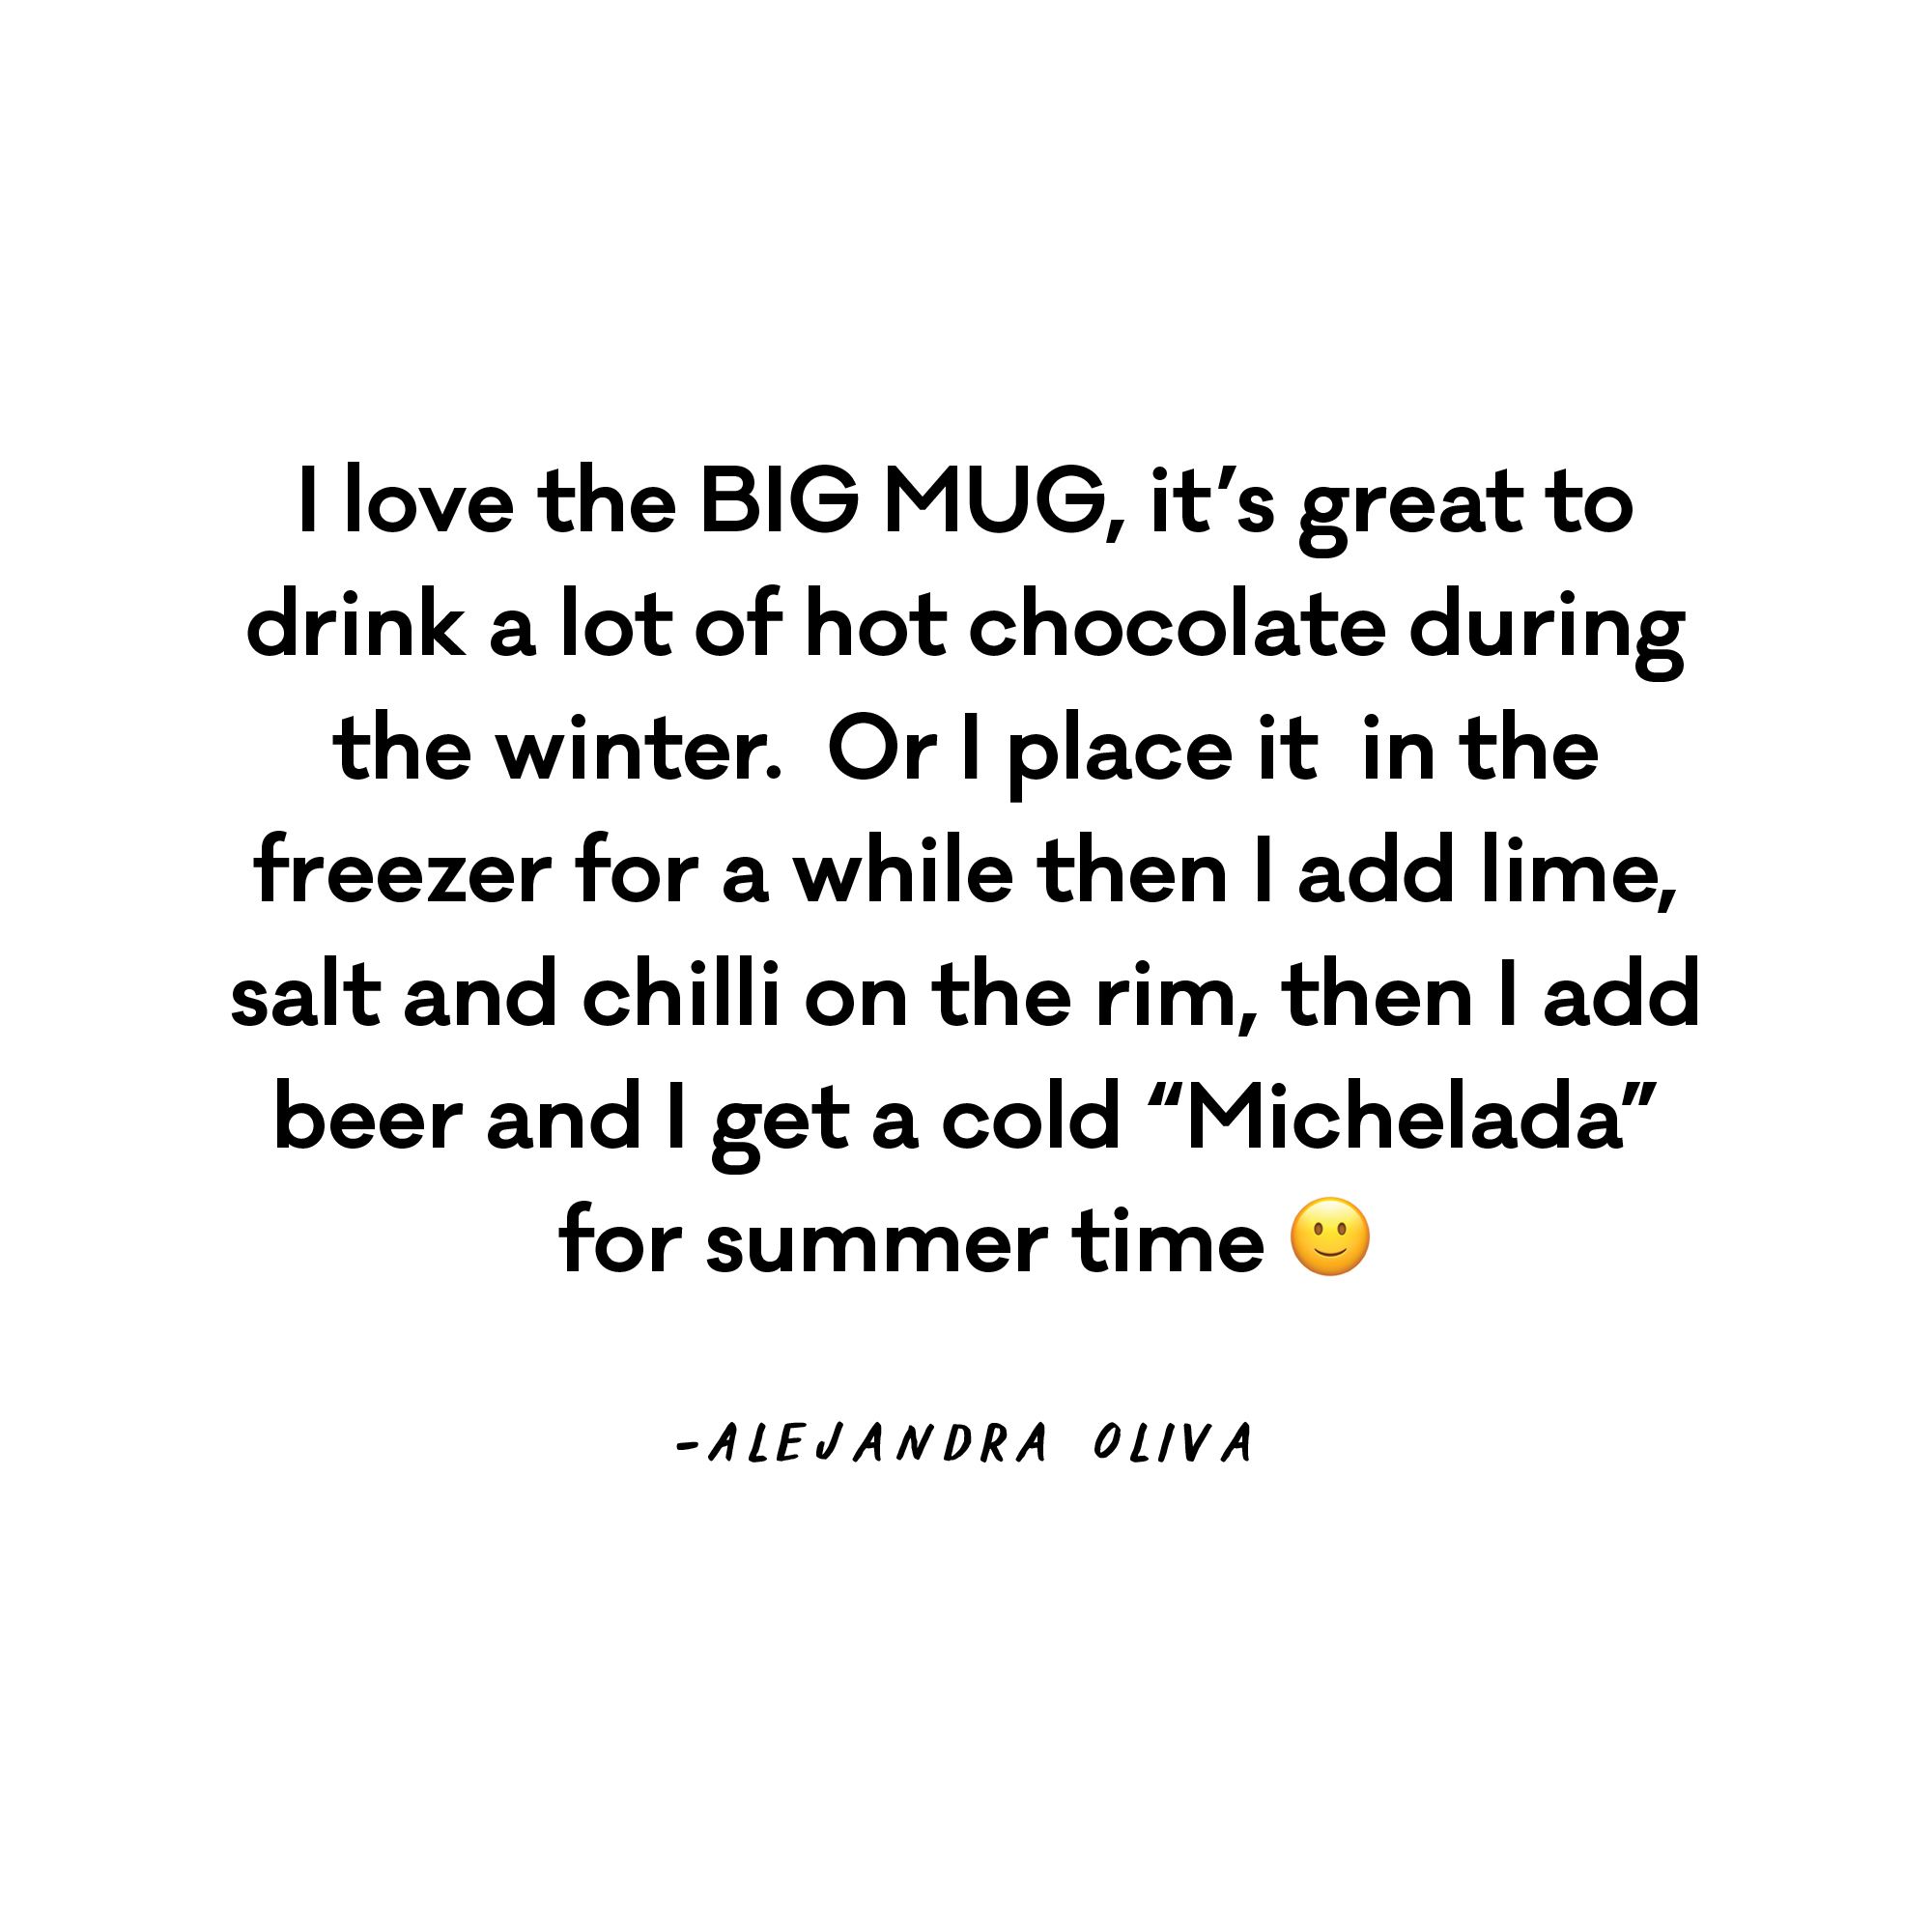 I love the BIG MUG, it's great to drink a lot of hot chocolate during the winter.  Or I place it  in the freezer for a while then I add lime, salt and chilli on the rim, then I add beer and I get a cold "Michelada" for summer time :) - Alejandra Oliva  